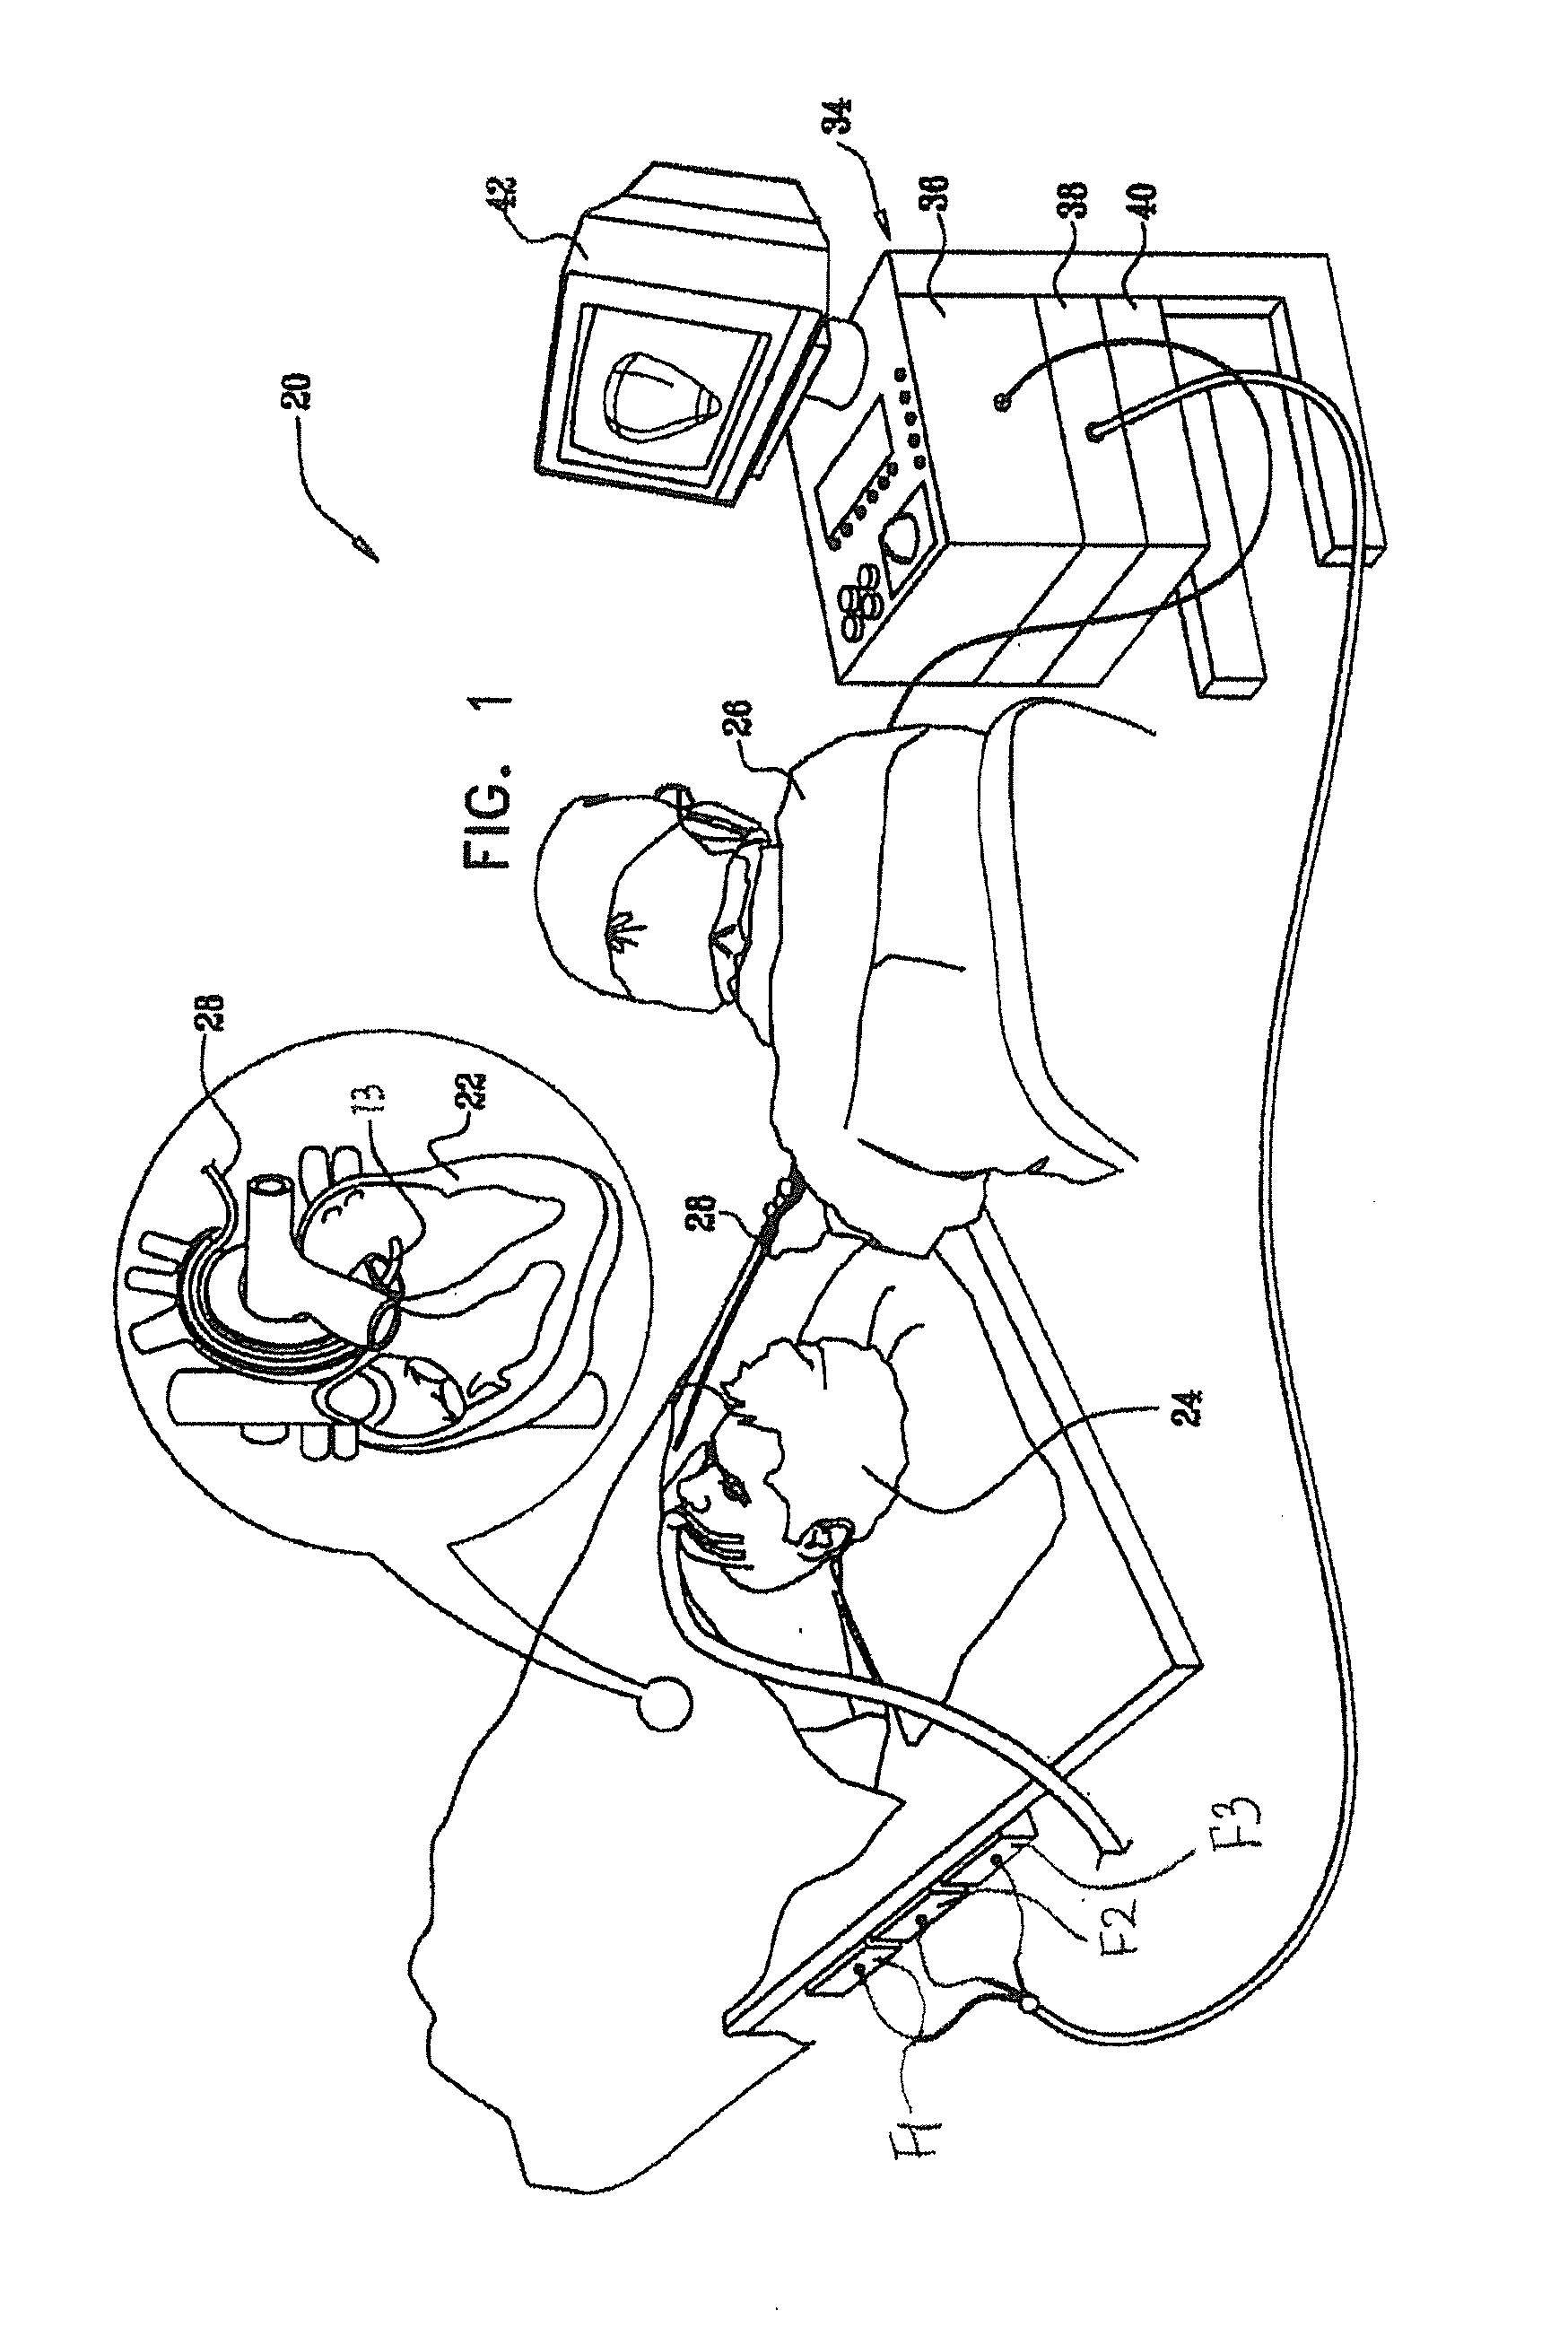 Catheter with combined position and pressure sensing structures